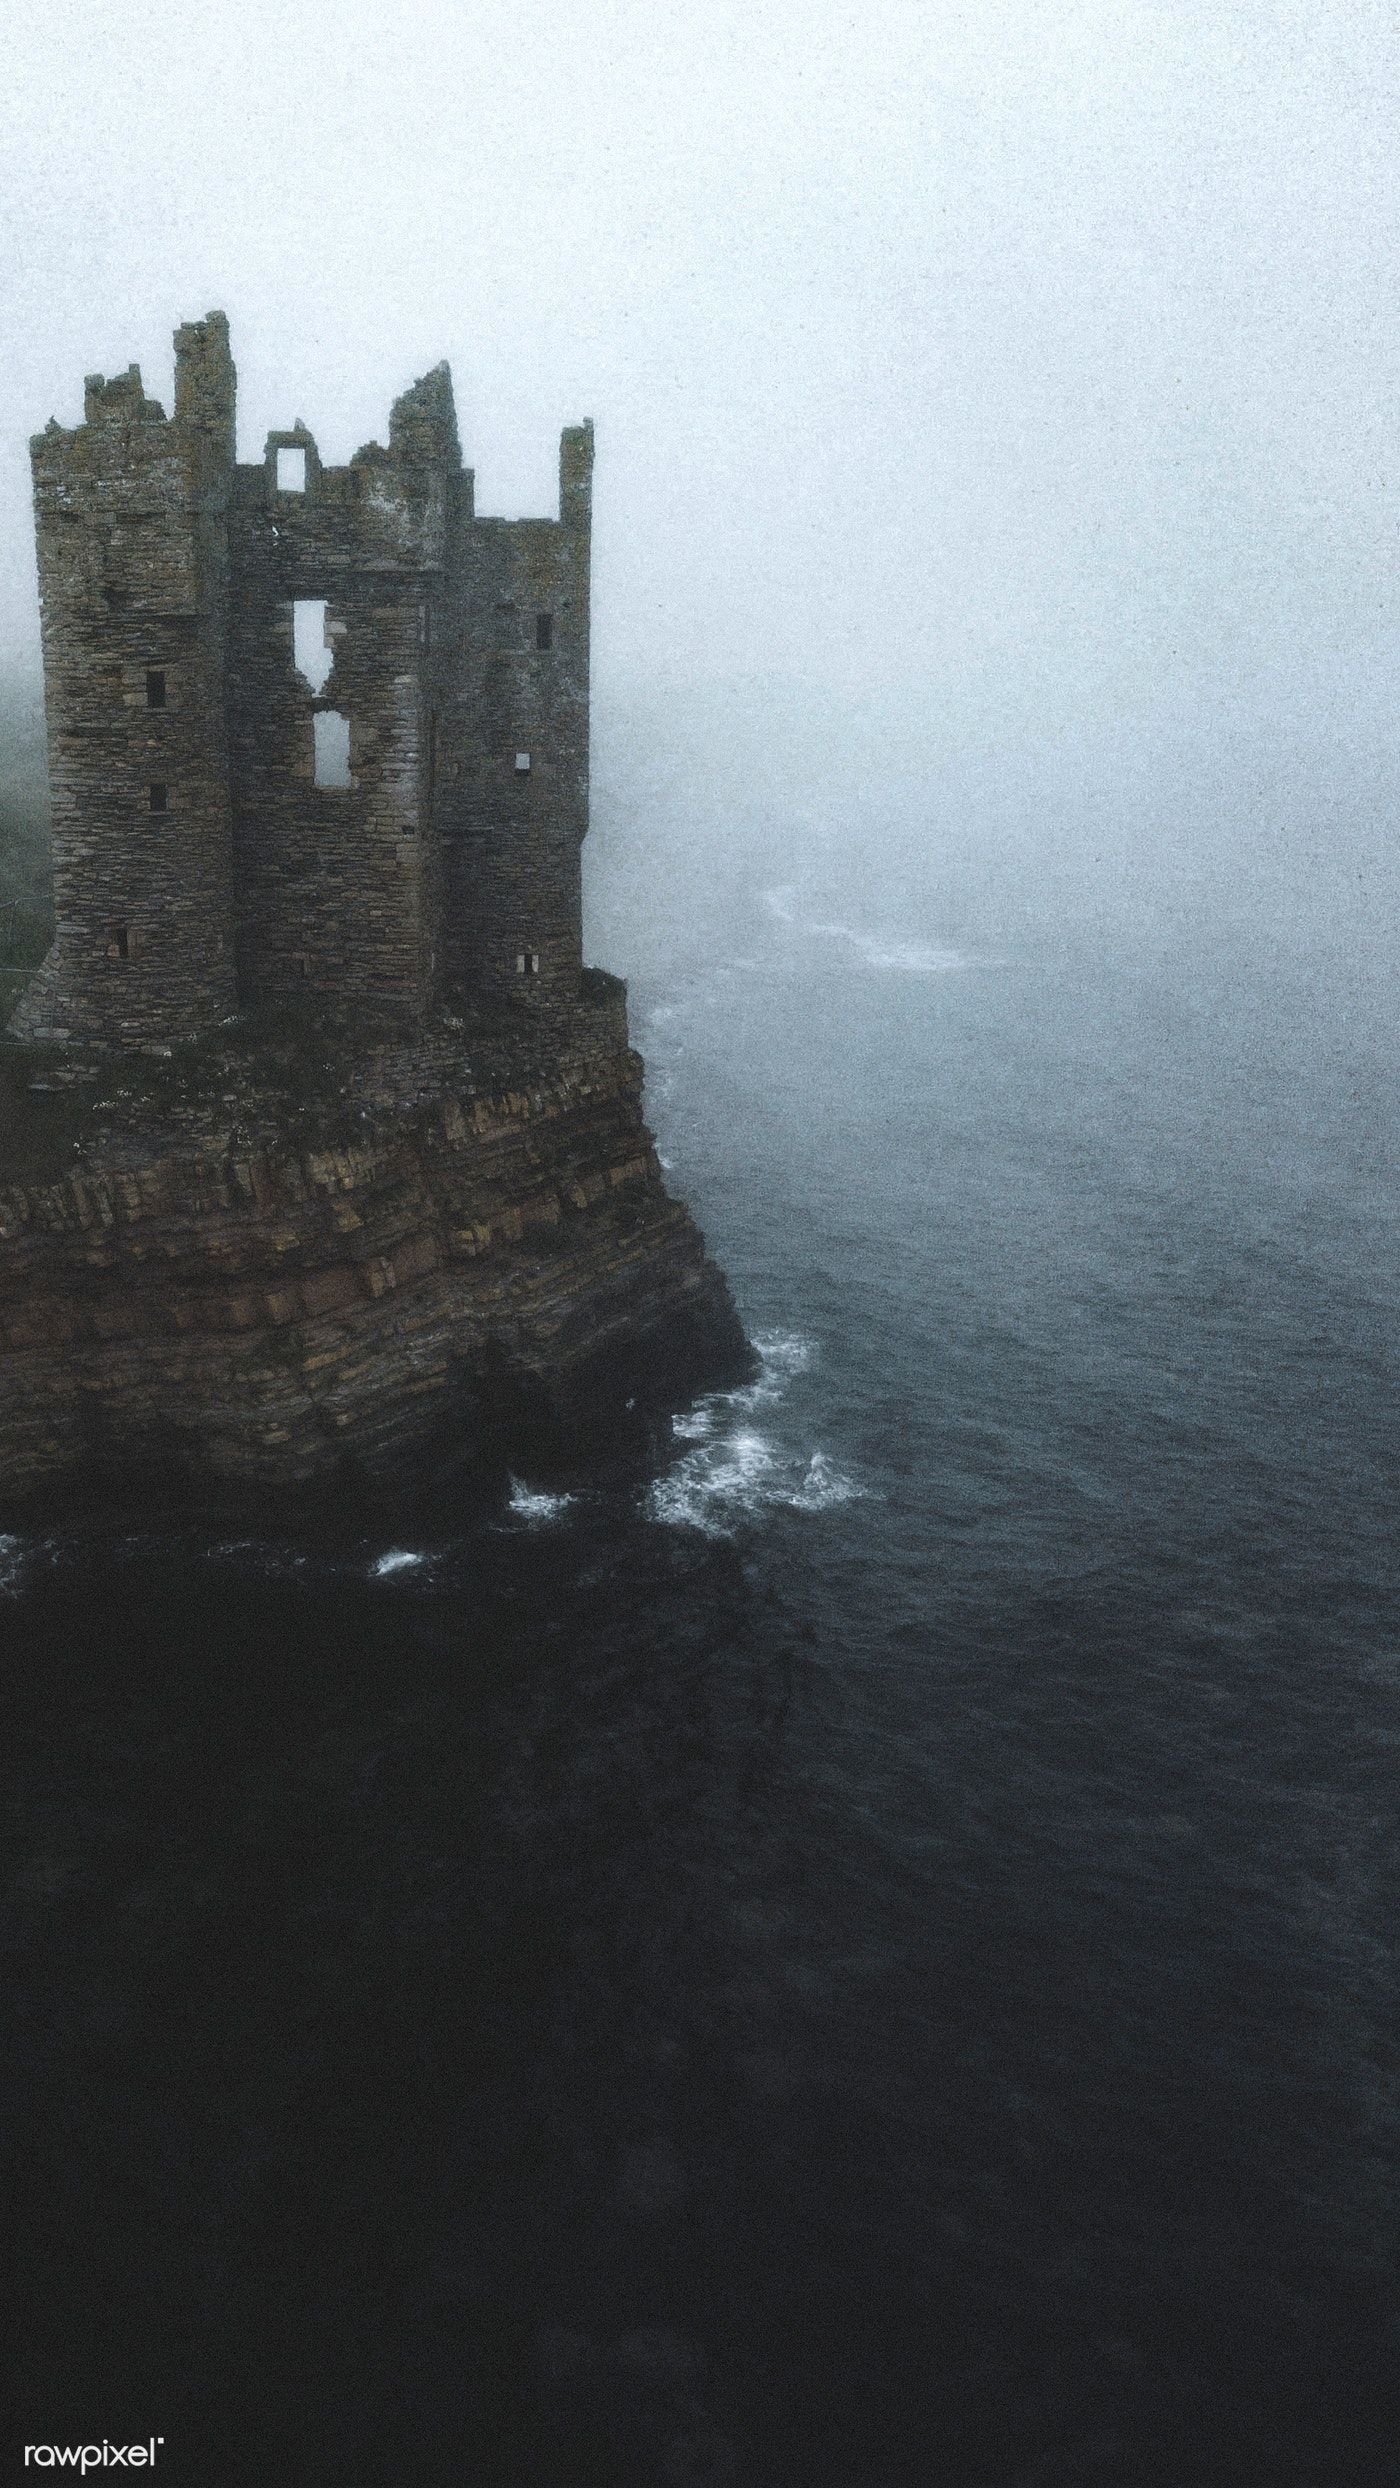 Download premium image of Misty view of Keiss Castle, Scotland